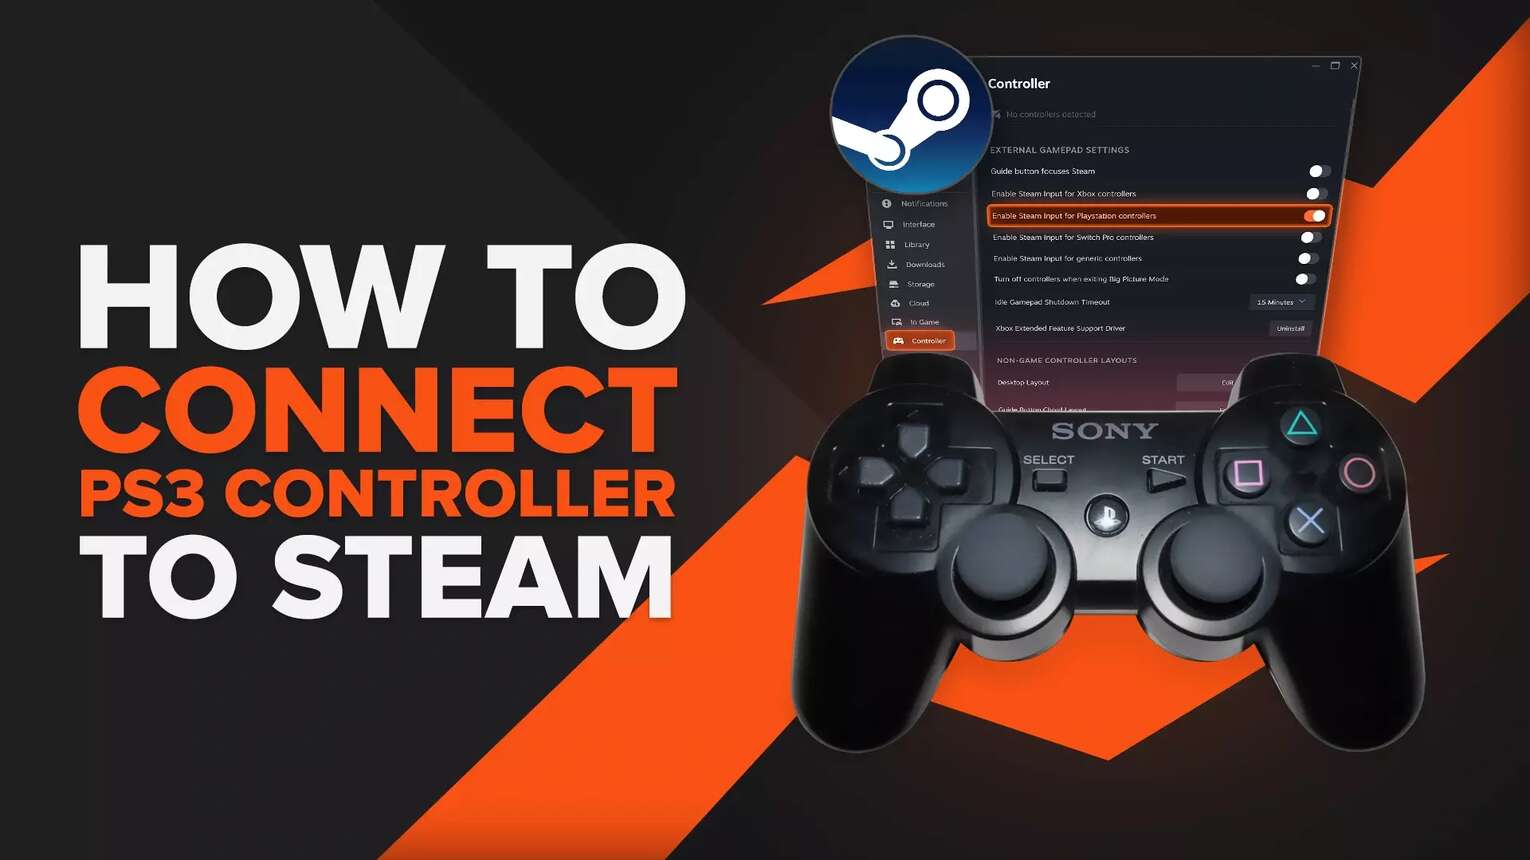 How to Connect a PS3 Controller to Steam on PC Easily